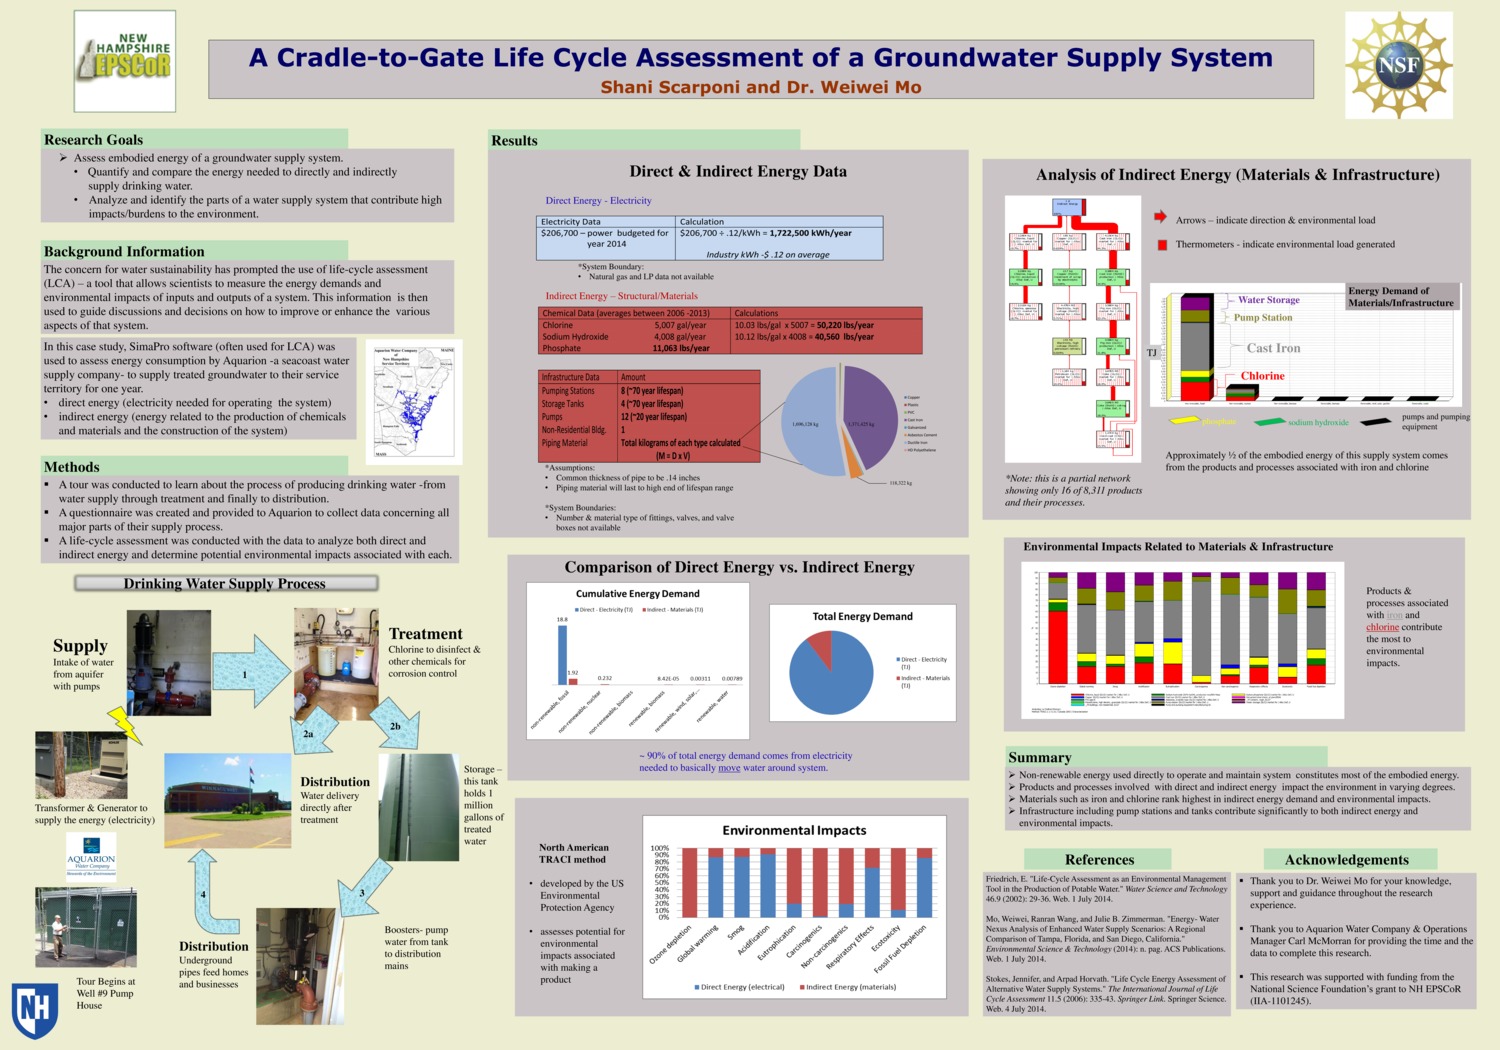 Life Cycle Assessment Groundwater by srhale